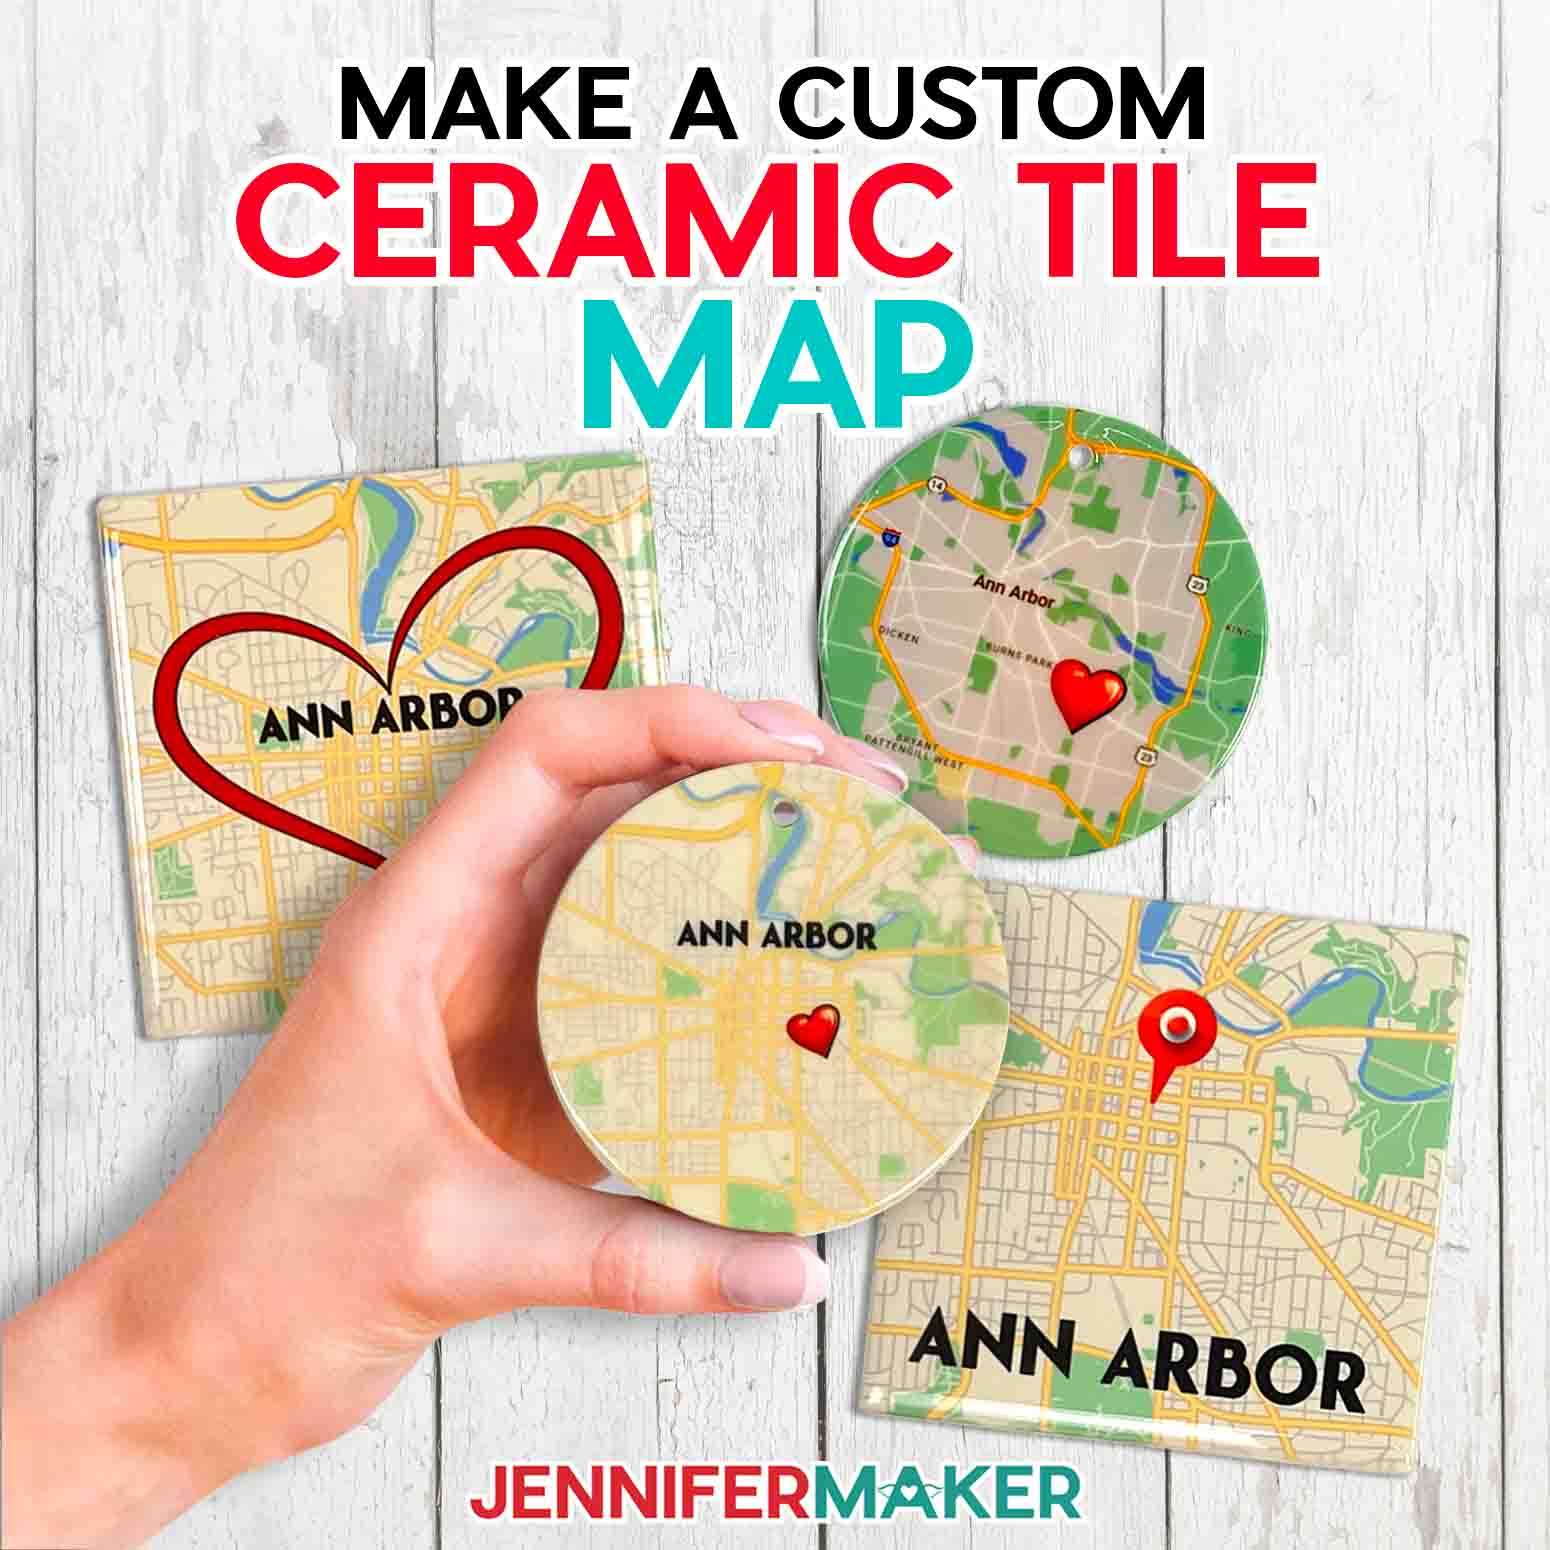 Make a custom ceramic tile map with sublimation with Jennifer Maker's tutorial! Image description: Three ceramic tile maps sit on a white wood surface, with one held close to the camera to show detail. Maps are of Ann Arbor, Michigan, and feature cute heart icons you can add in Cricut Design Space.